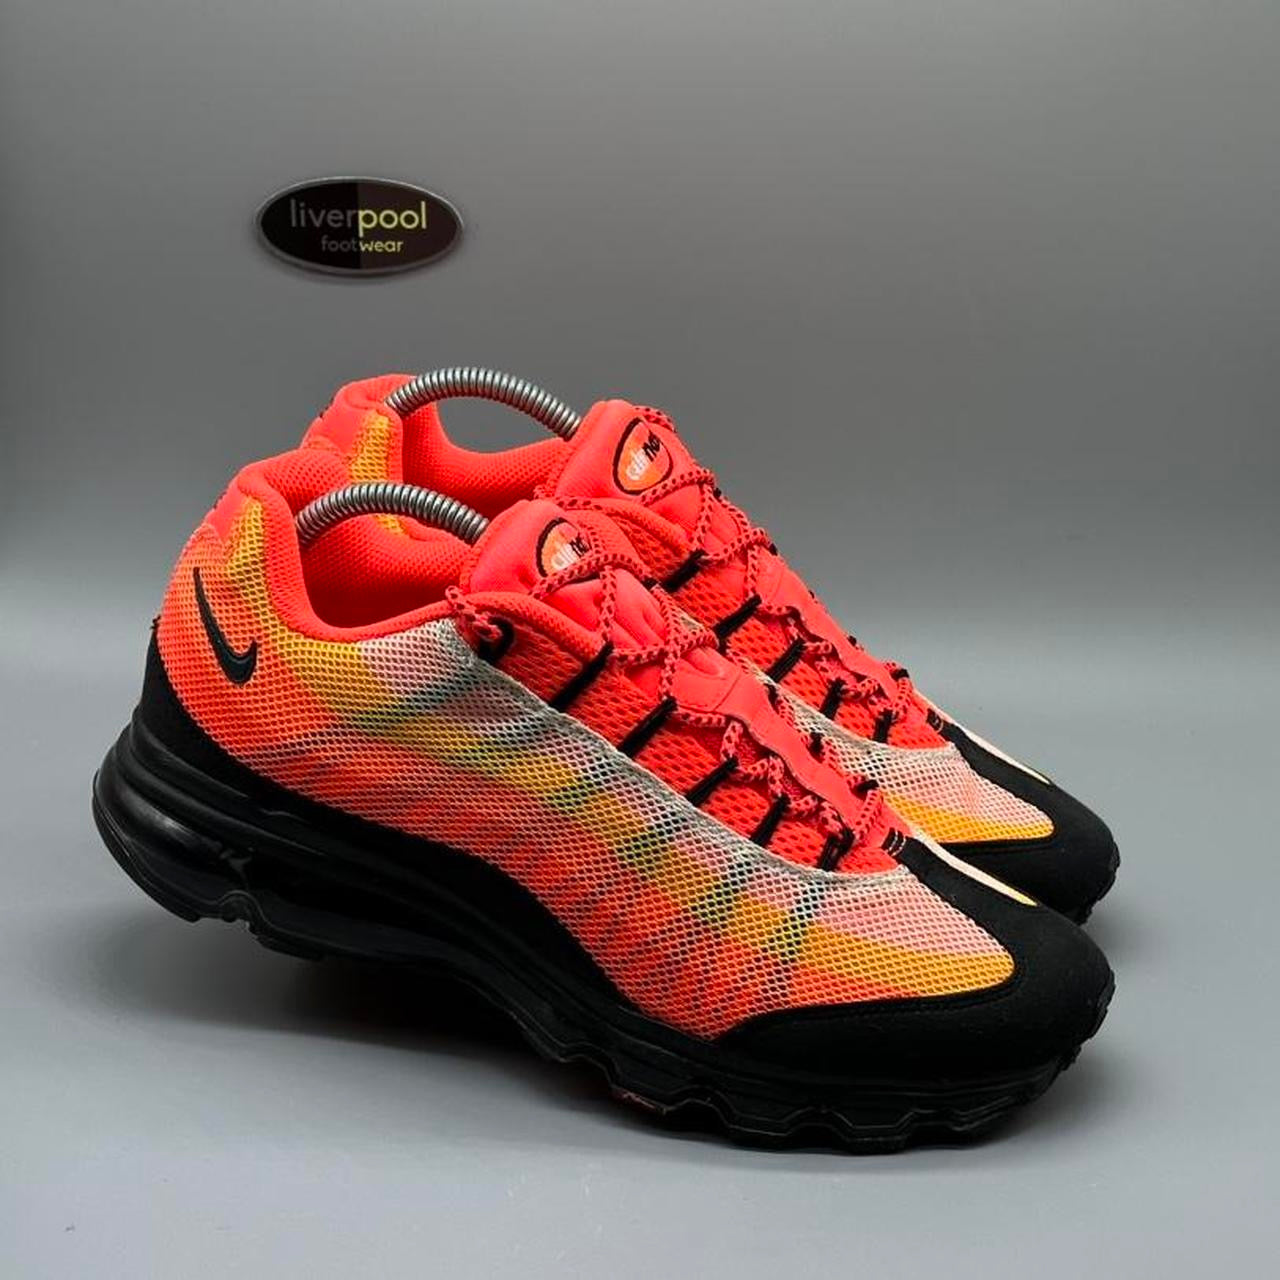 Nike Air Max 95 Dynamic Flywire - Sunset